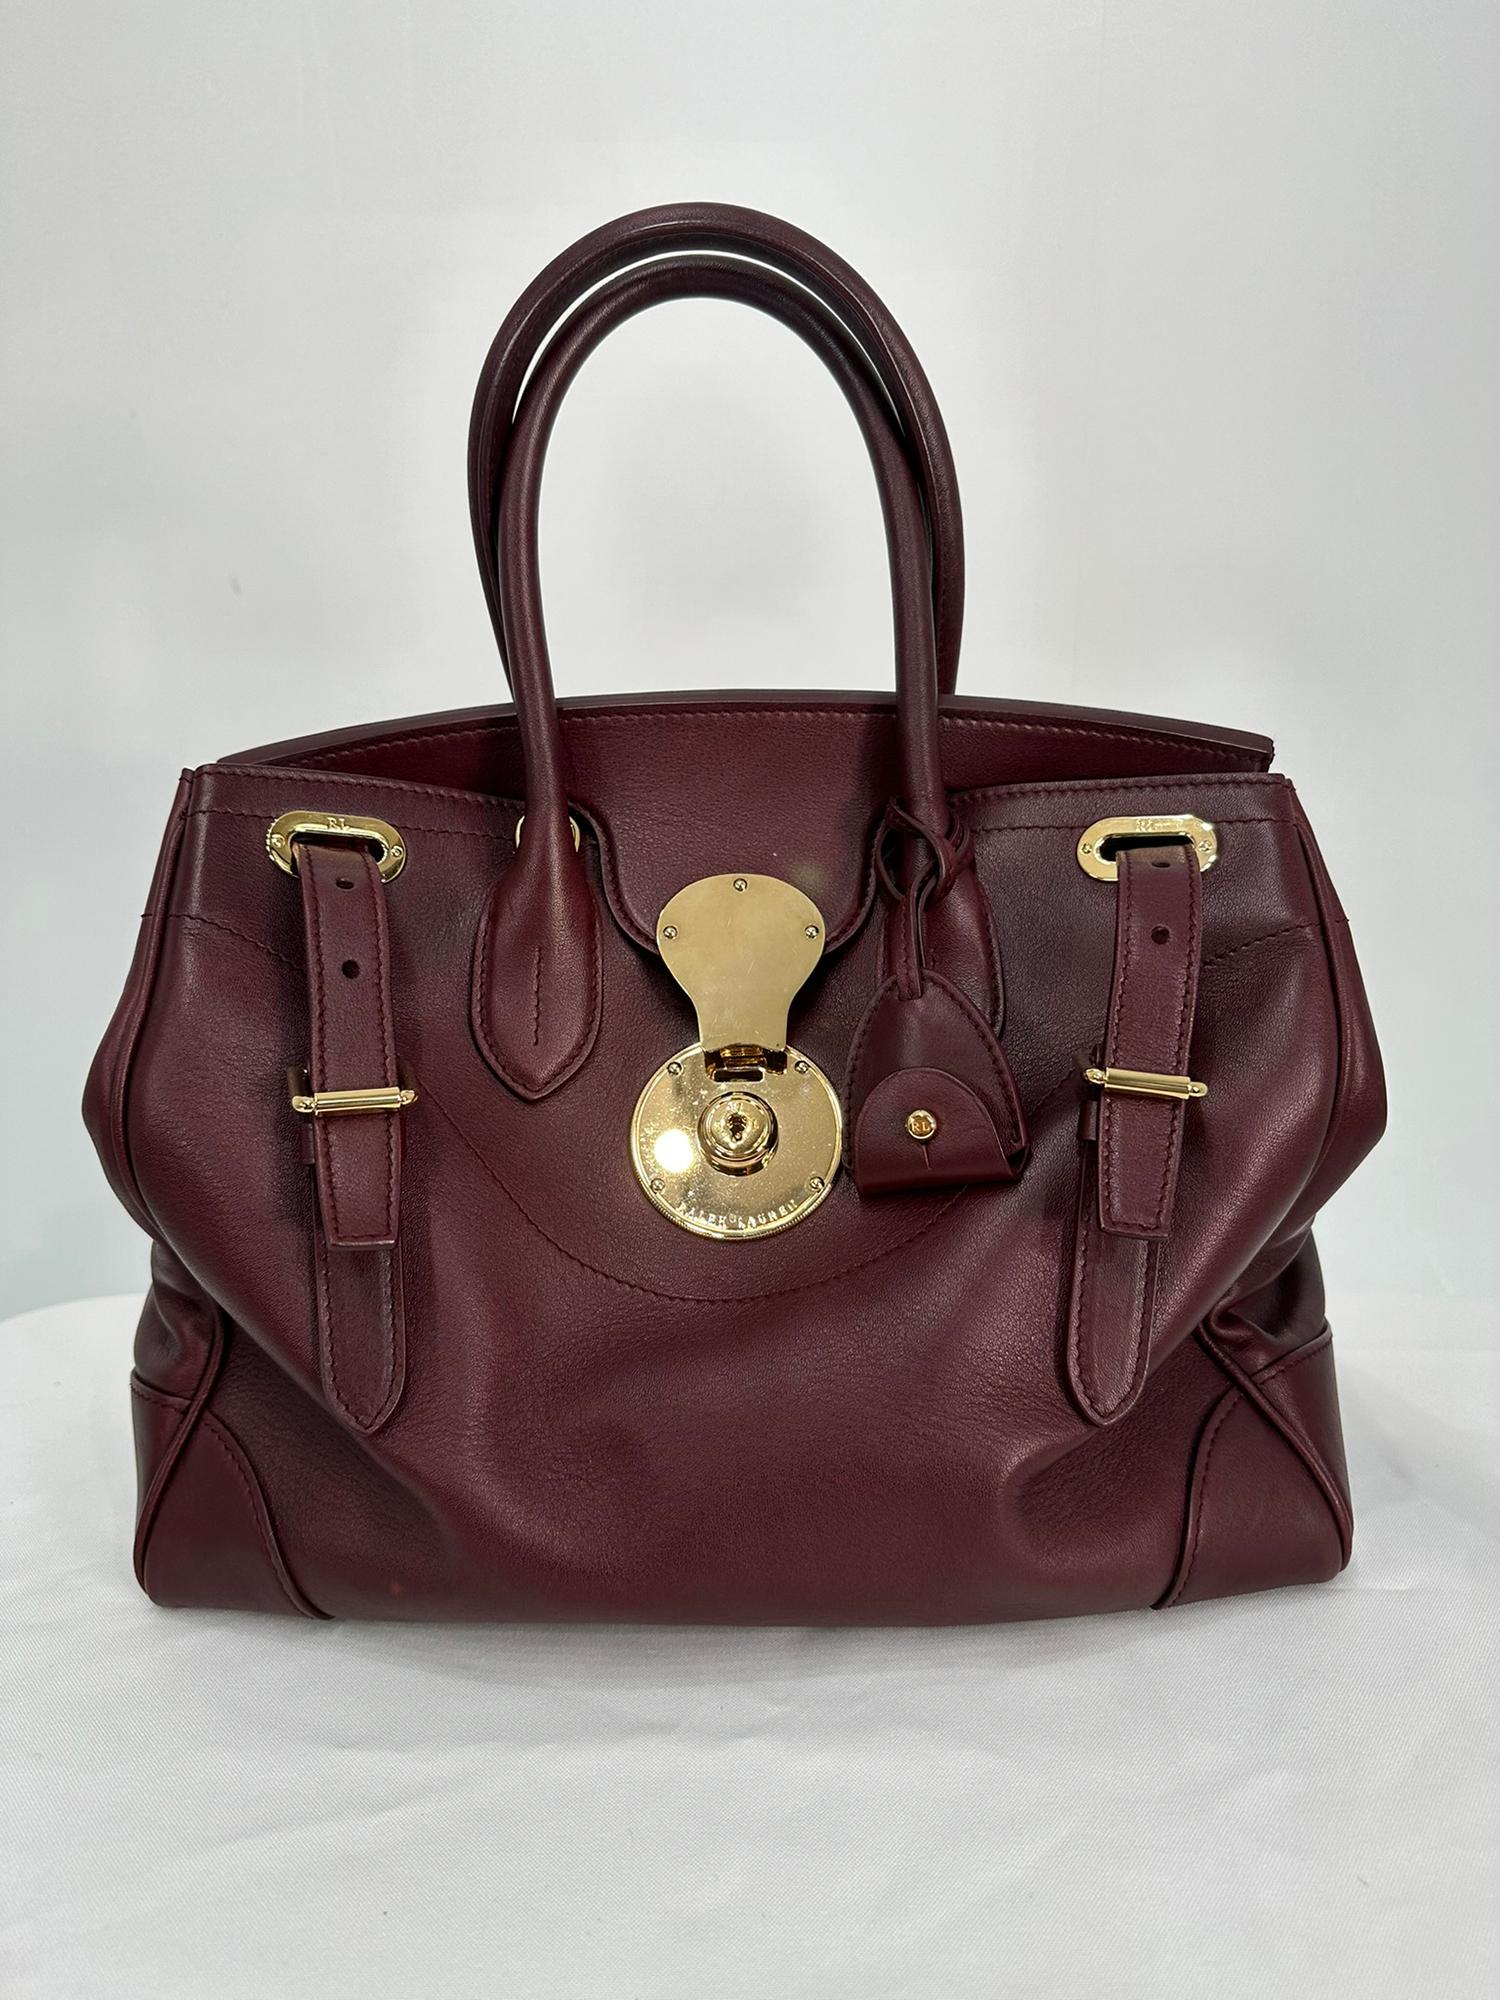 Ralph Lauren Luxe Burgundy Calf Ricky 33 Gold Hardware Handbag with Accessories
2 top handles, each with an 11.4 cm handle drop.
Removable adjustable cross body strap with a  55.9 cm max. drop.
Gold brass hardware with signature Ricky push lock at